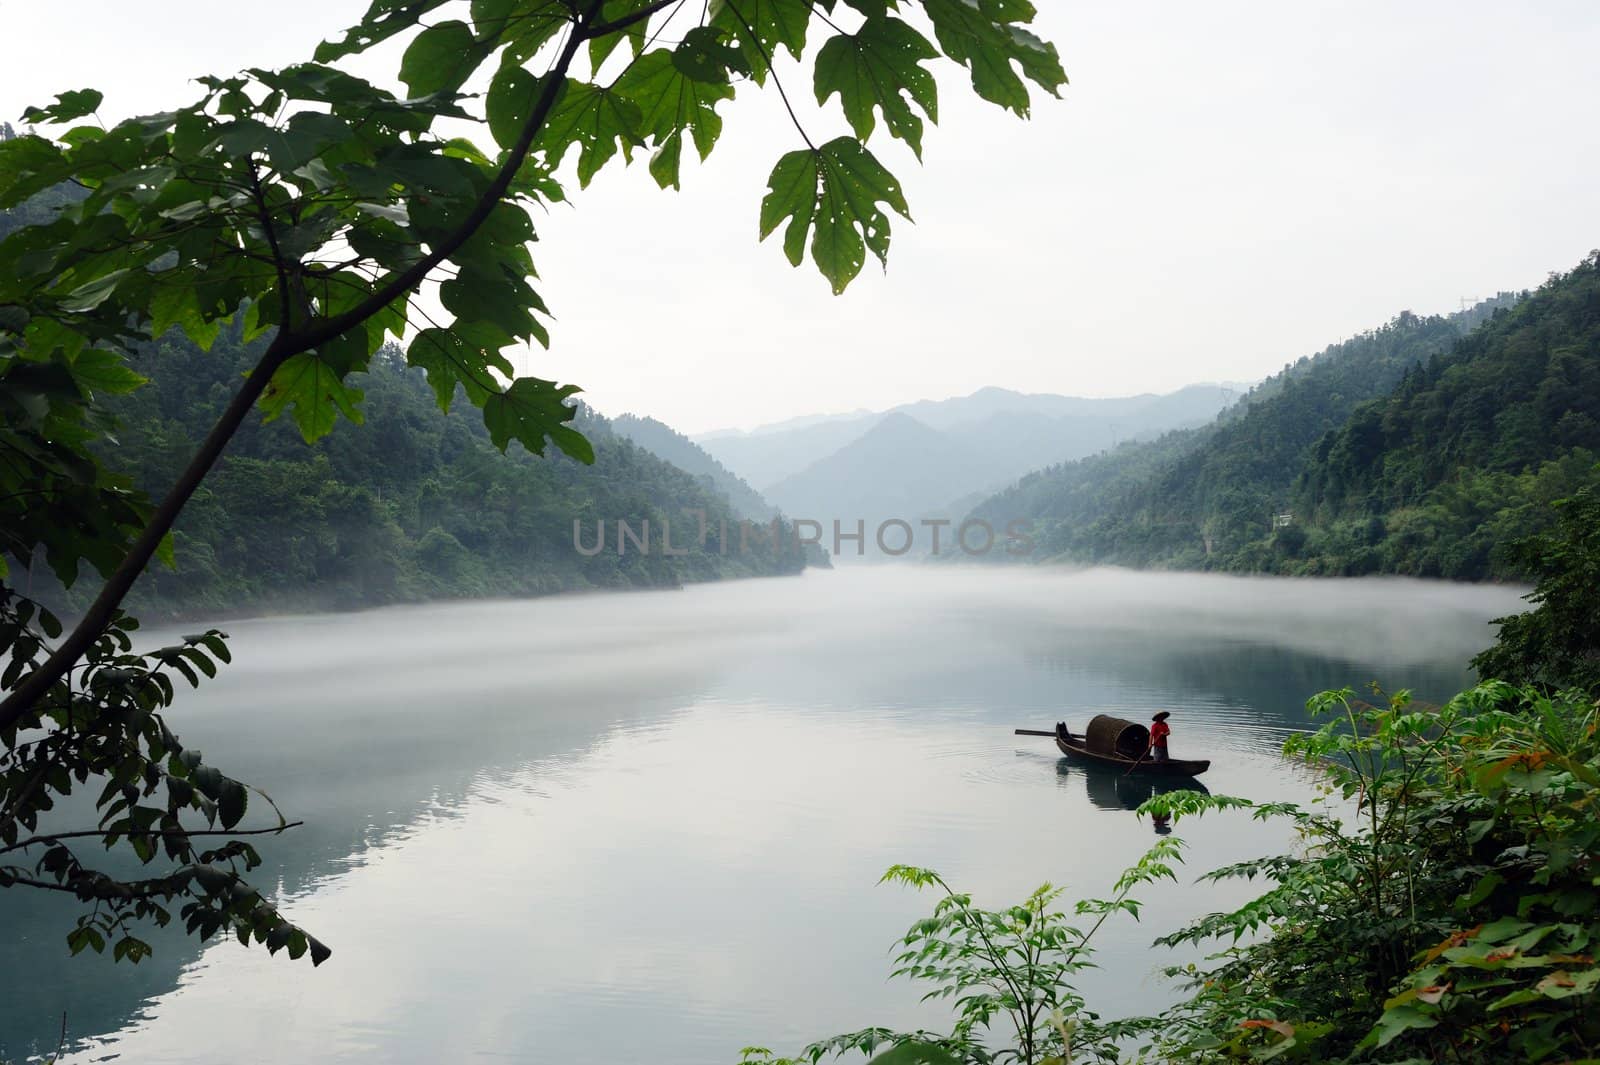 Fishing boat on the foggy river in hunan province of China